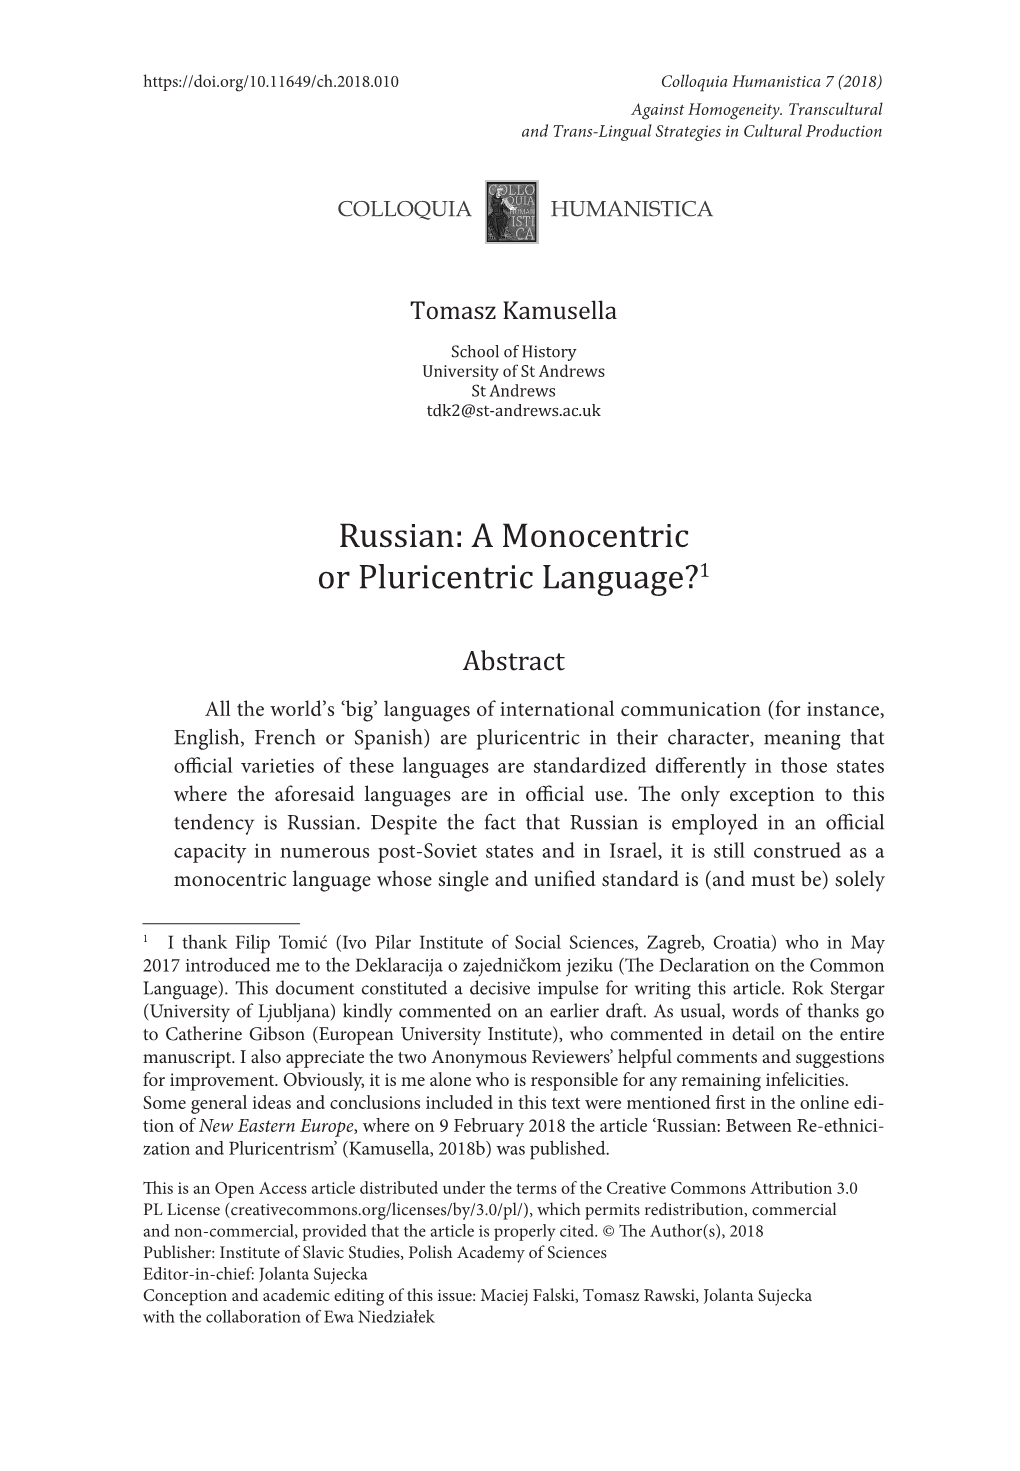 Russian: a Monocentric Or Pluricentric Language?1